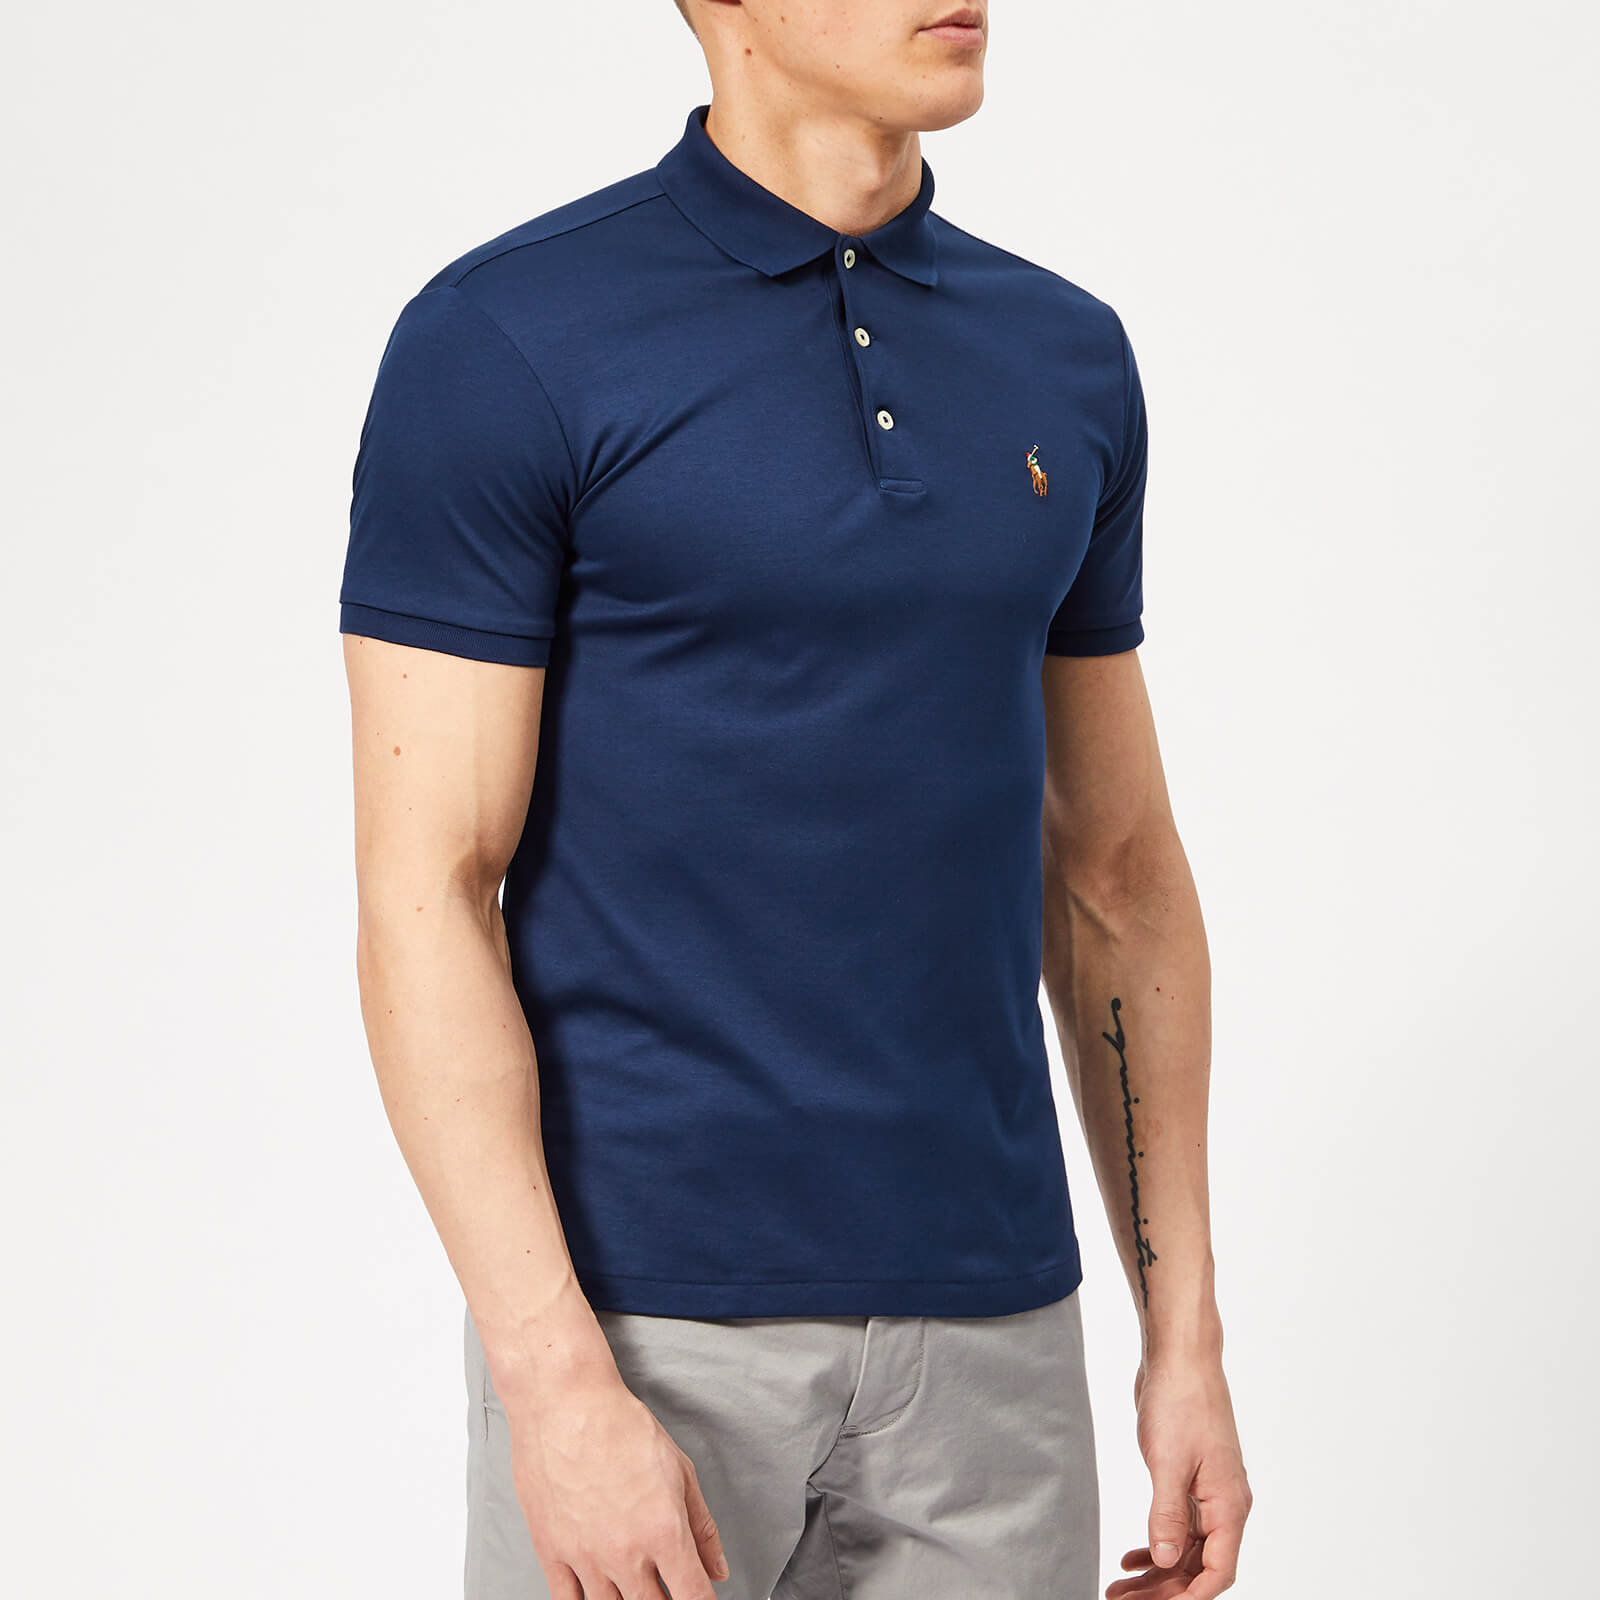 Polo Shirt Archives | SNM APPARELS